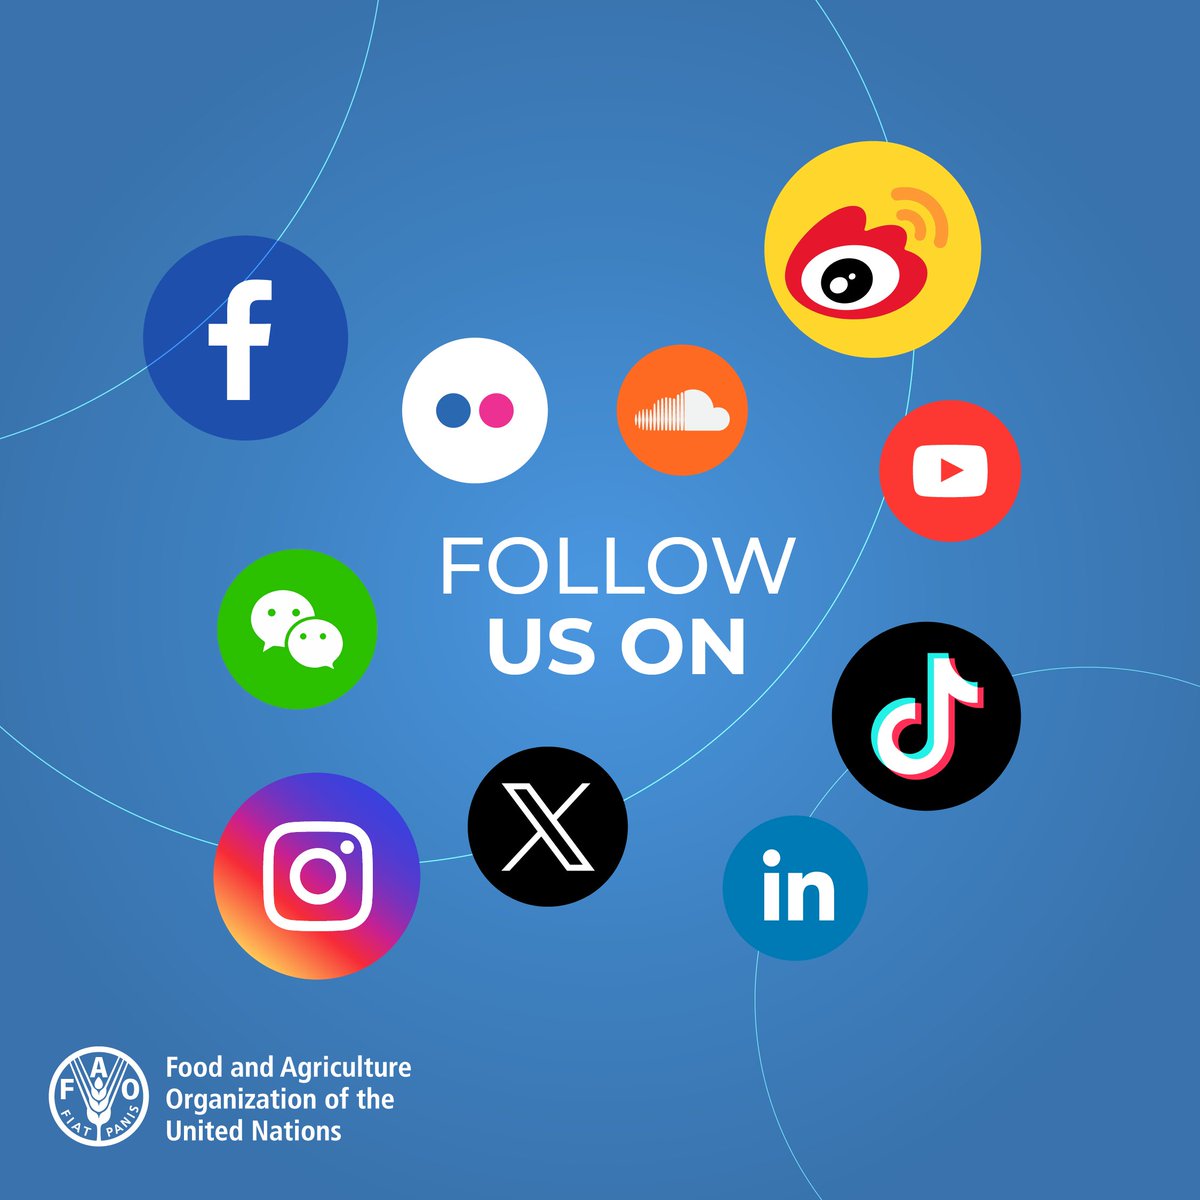 Latest on food & agriculture from @FAO 👇 🔹Facebook - facebook.com/UNFAO 🔹Instagram - instagram.com/fao 🔹LinkedIn - linkedin.com/company/fao 🔹TikTok - tiktok.com/@fao 🔹WeChat - UNFAO 🔹Weibo - weibo.com/unfao 🔹X - twitter.com/i/lists/175697…